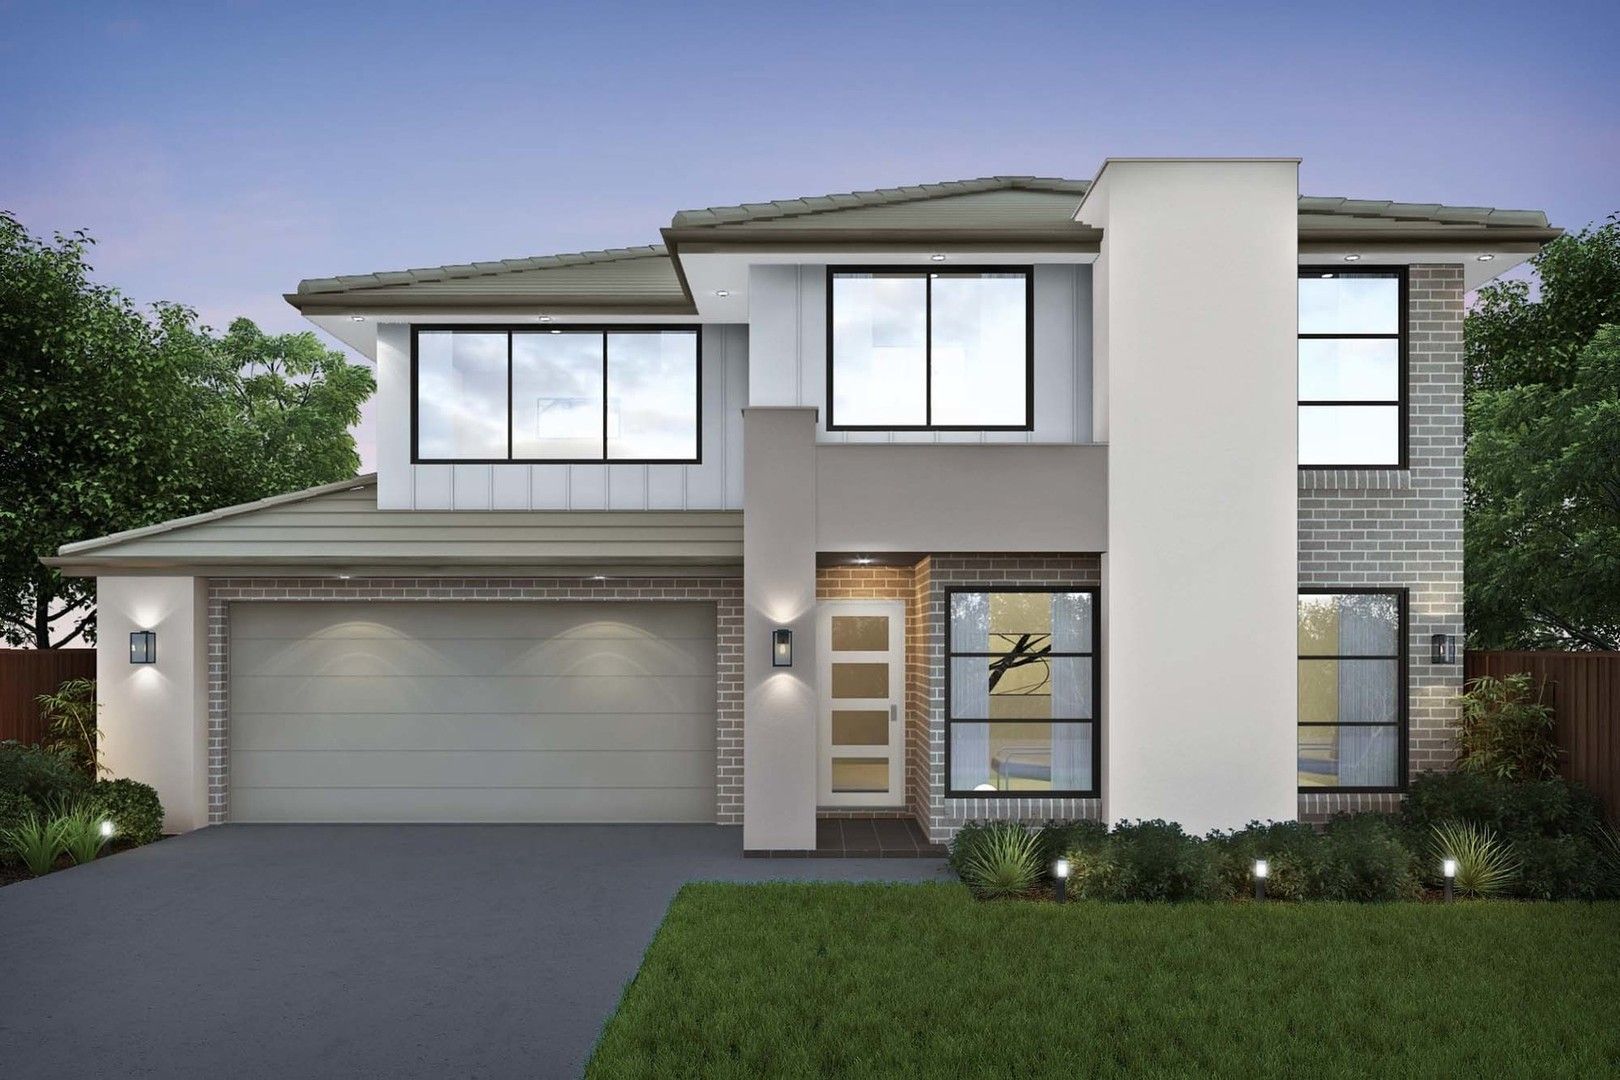 5 bedrooms New House & Land in Lot 2028A Figtree Hill GILEAD NSW, 2560